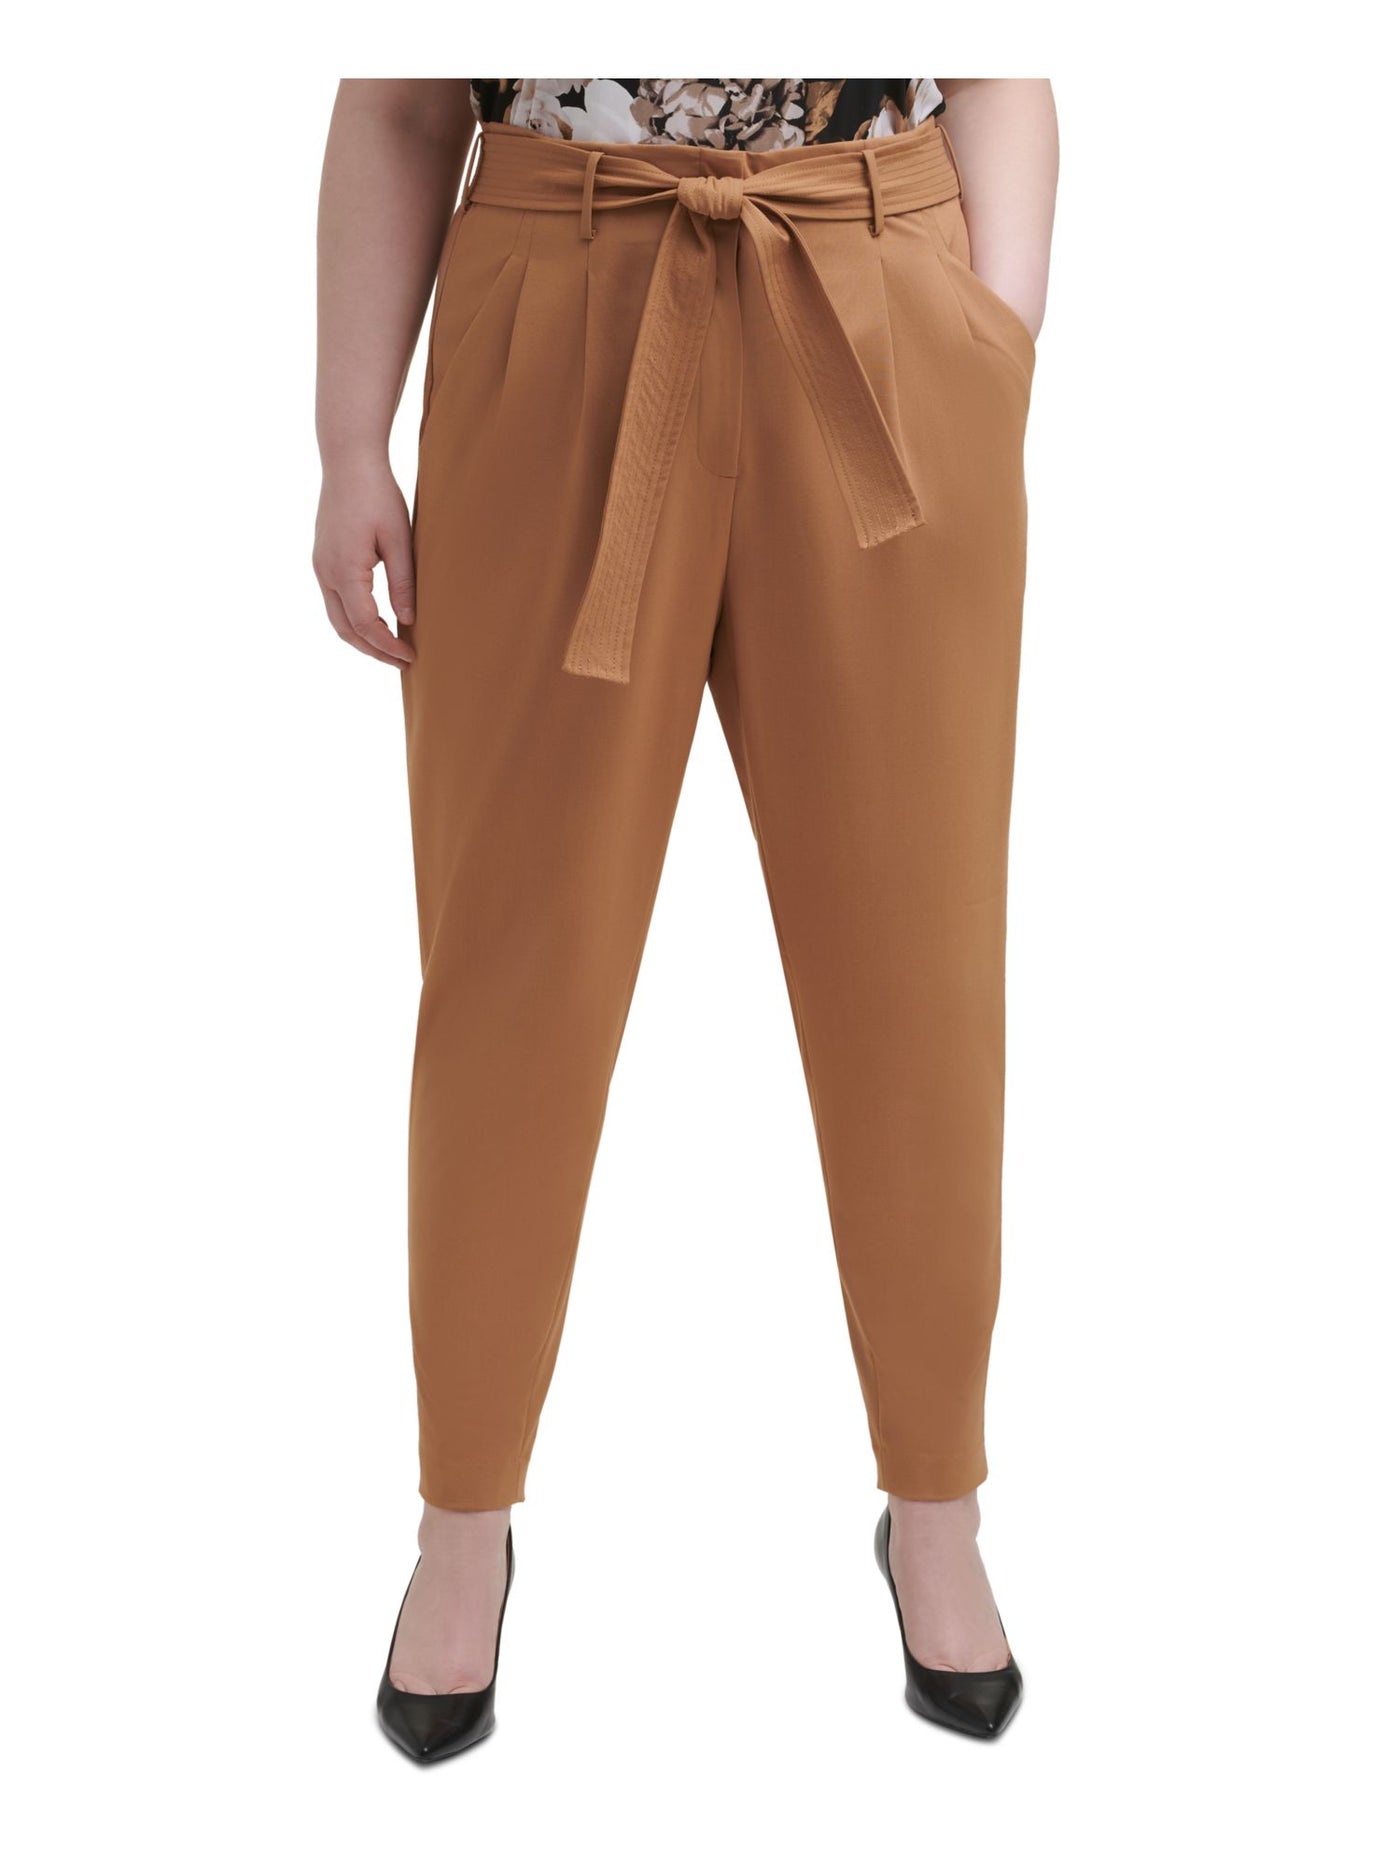 CALVIN KLEIN Womens Brown Stretch Pleated Belted Mid Rise Ankle-length Wear To Work Pants Plus 24W